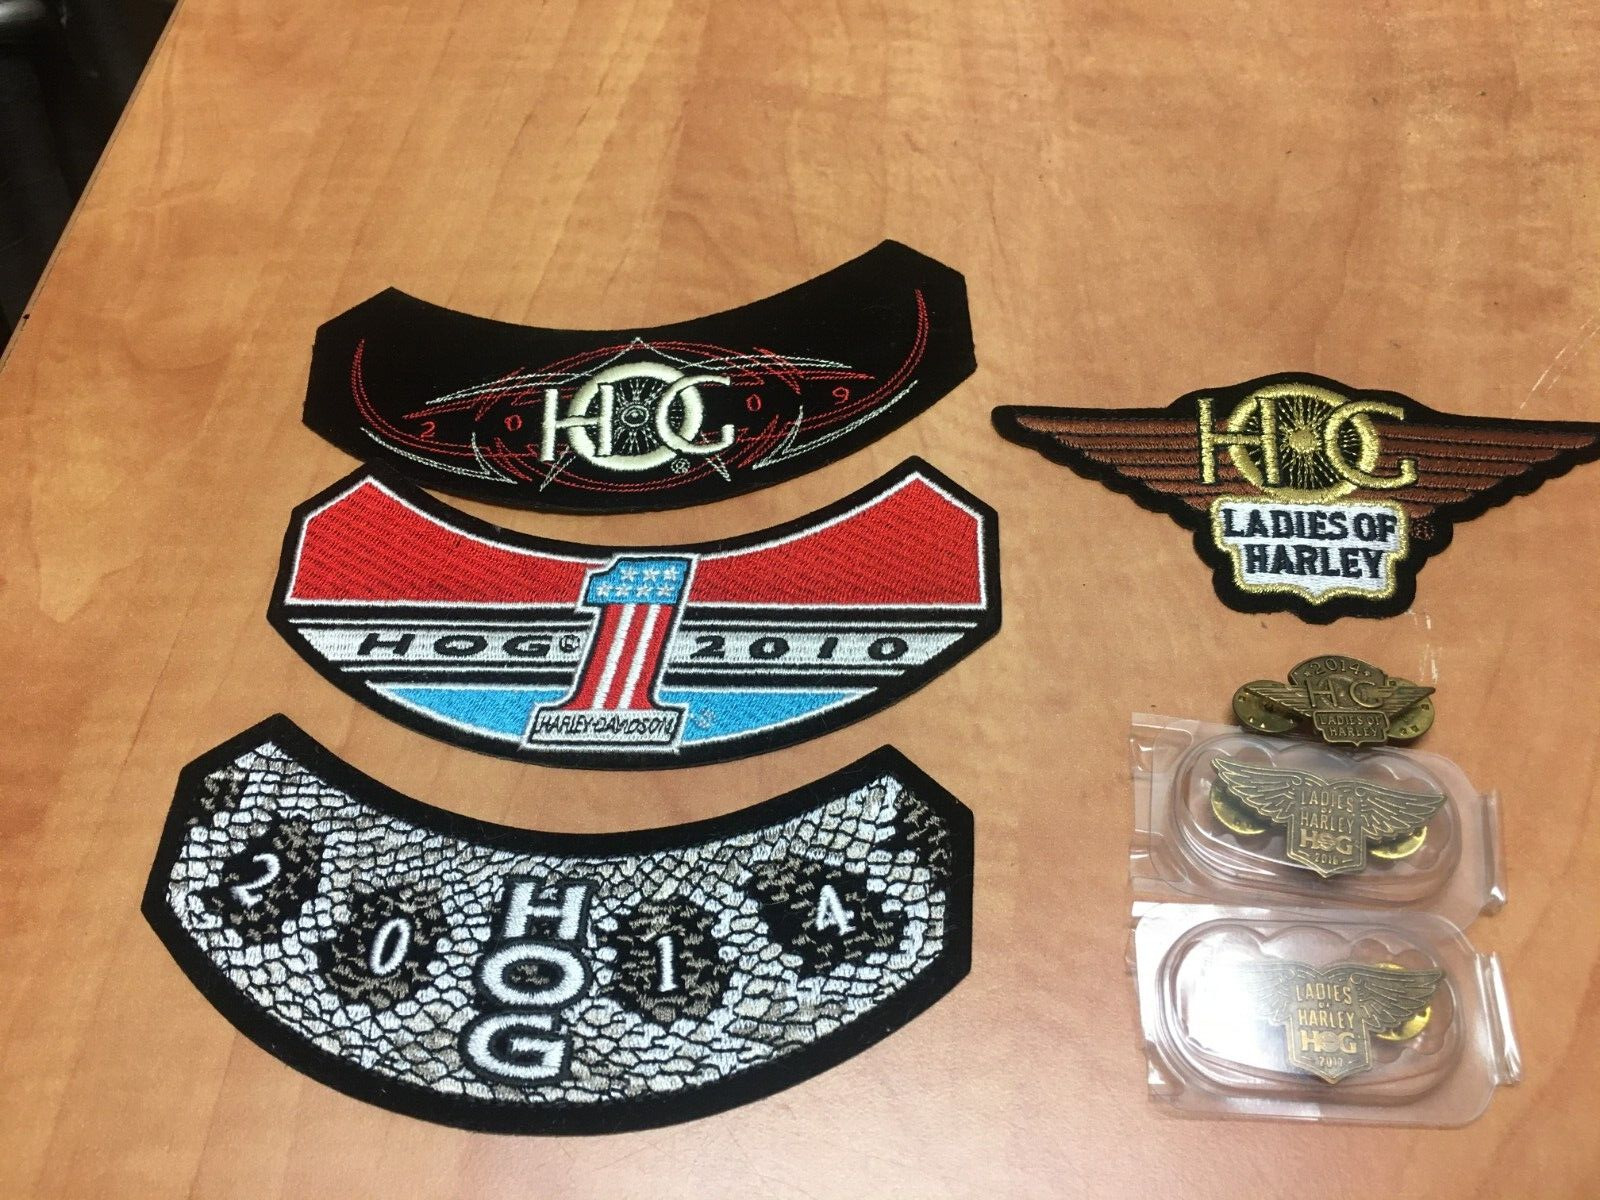 Lot Of 7 H.O.G. Harley Owners Group Patches  & Ladies of Harley  Rocker Pins